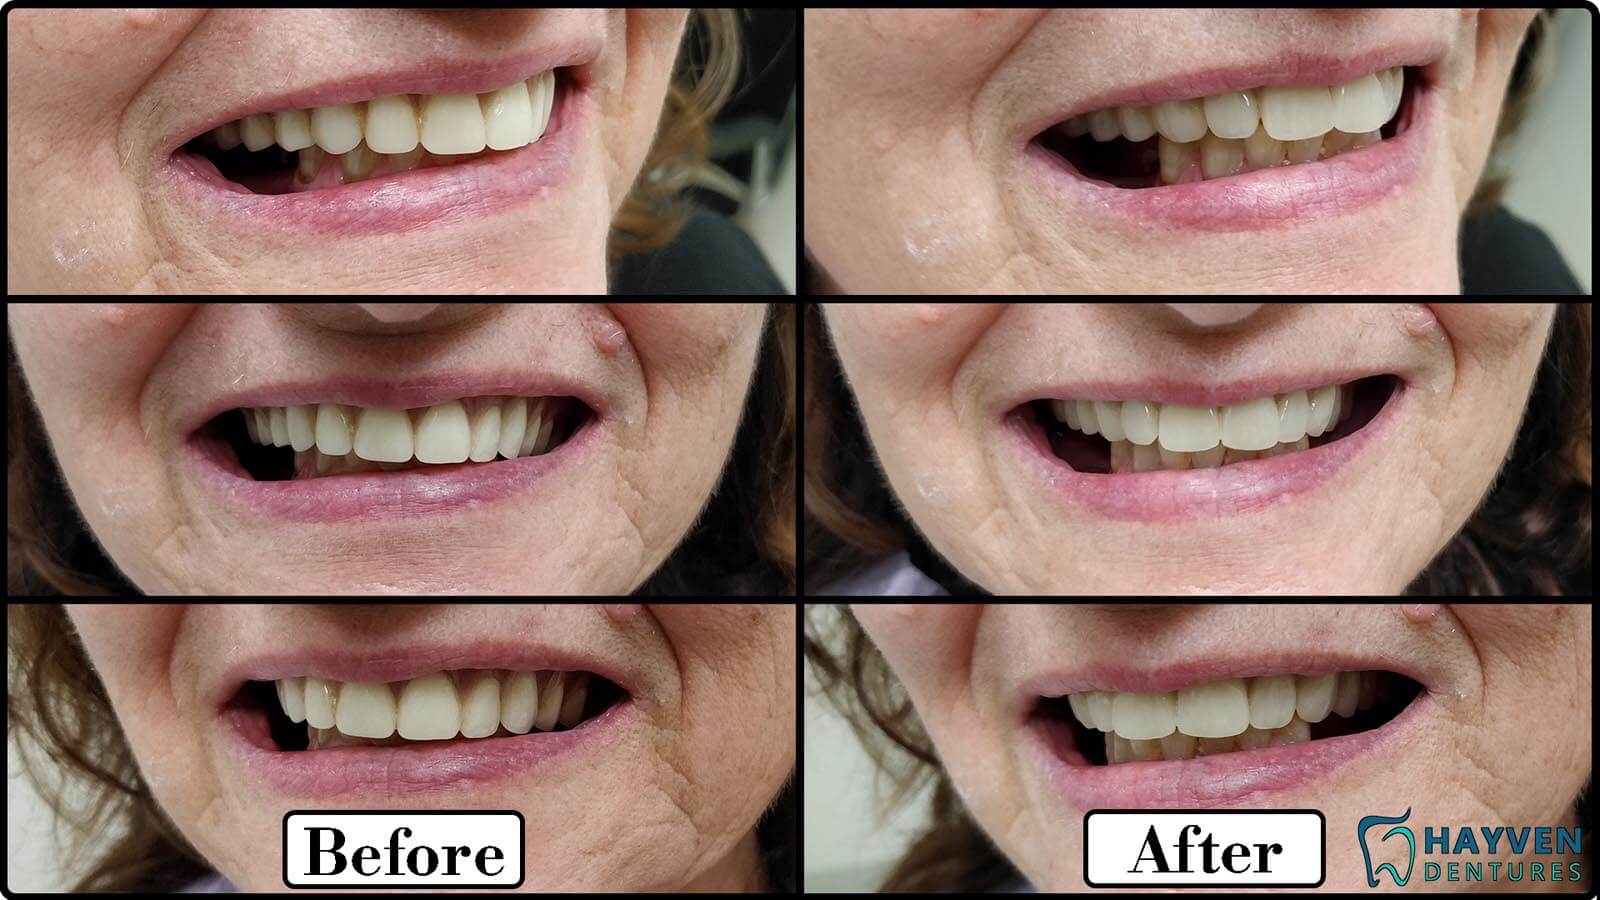 Before: Patient's teeth with visible problems. After: Patient with their new dentures.